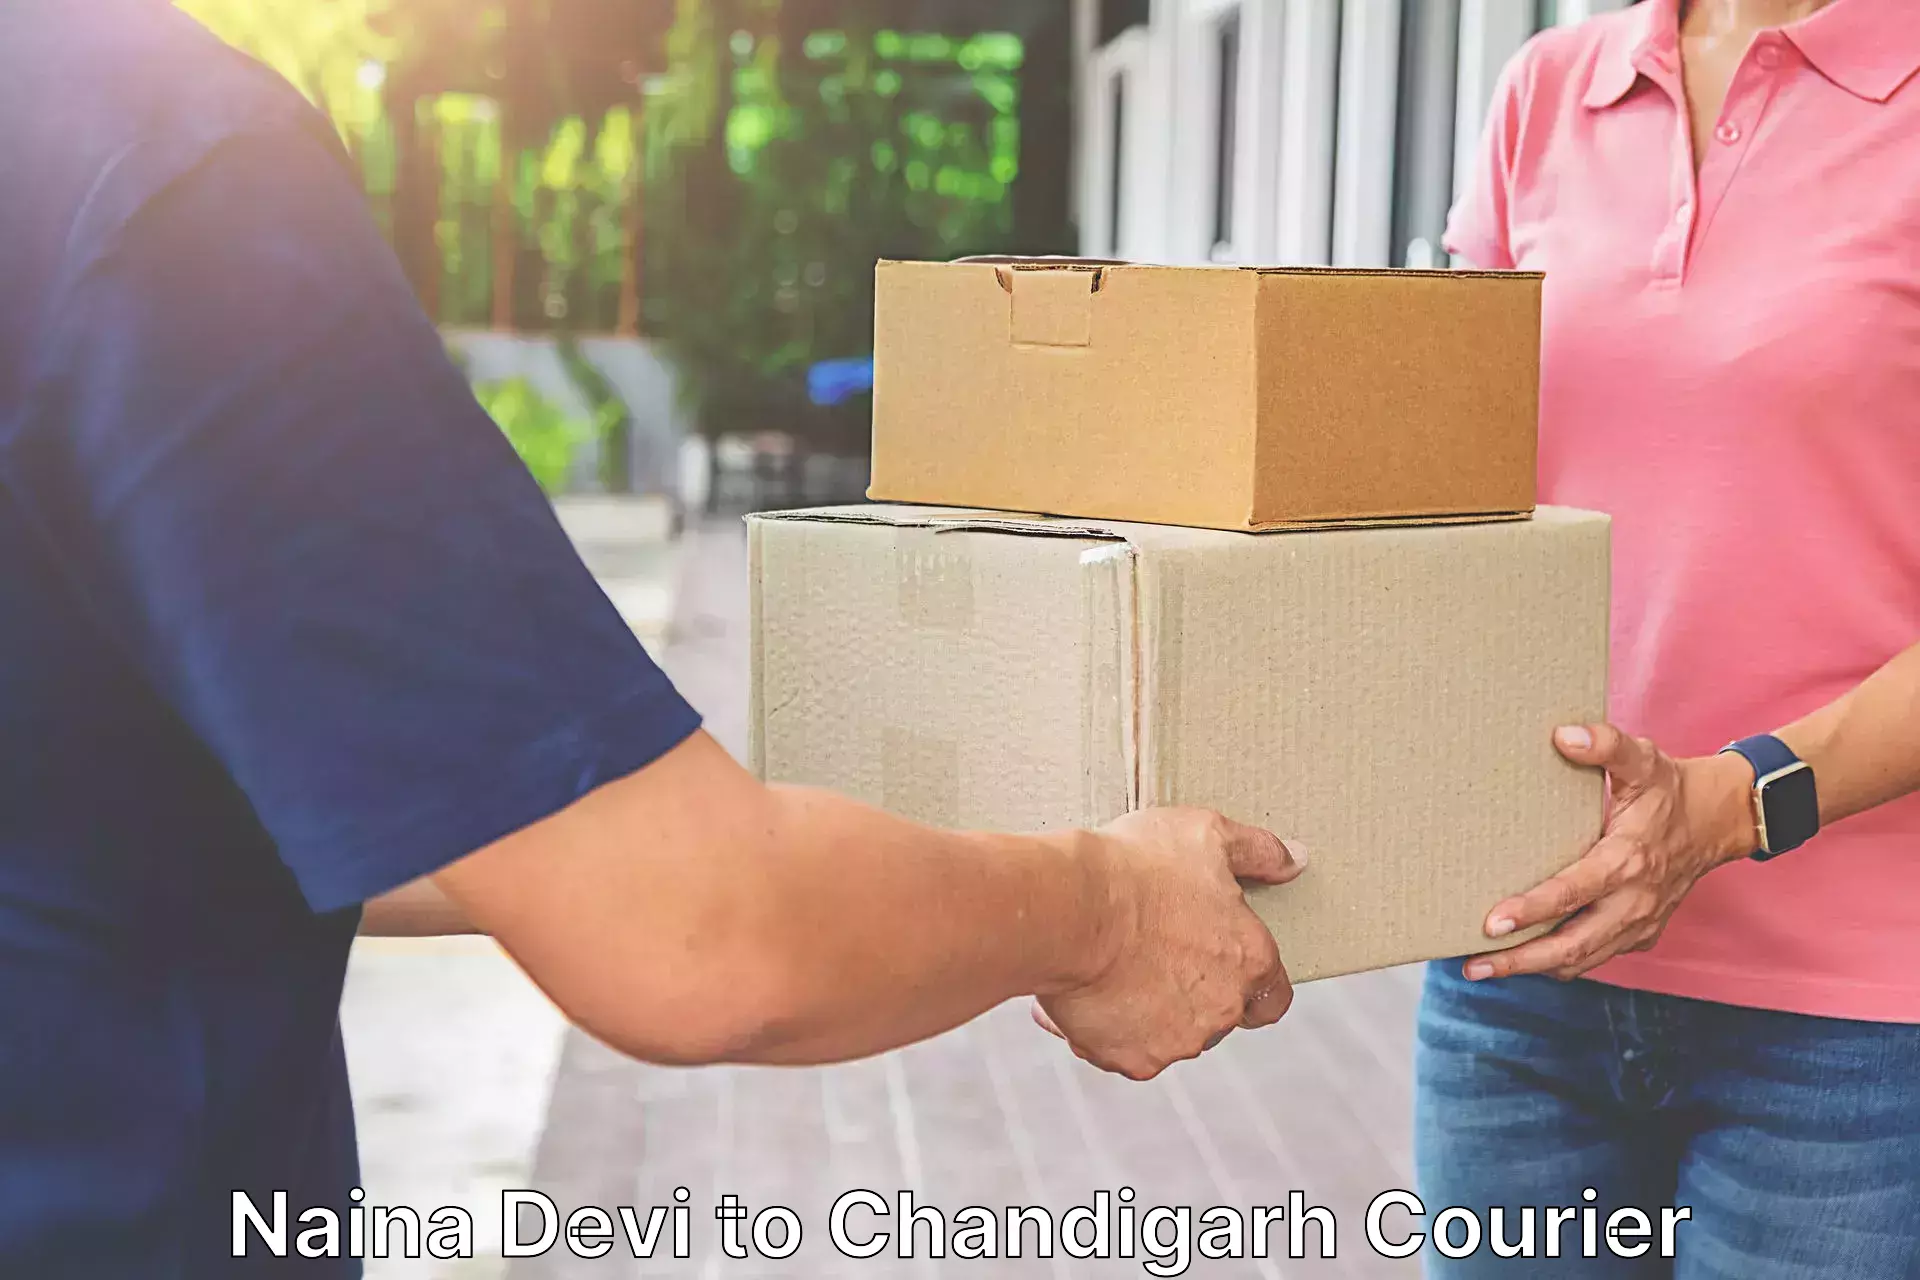 Global courier networks Naina Devi to Panjab University Chandigarh